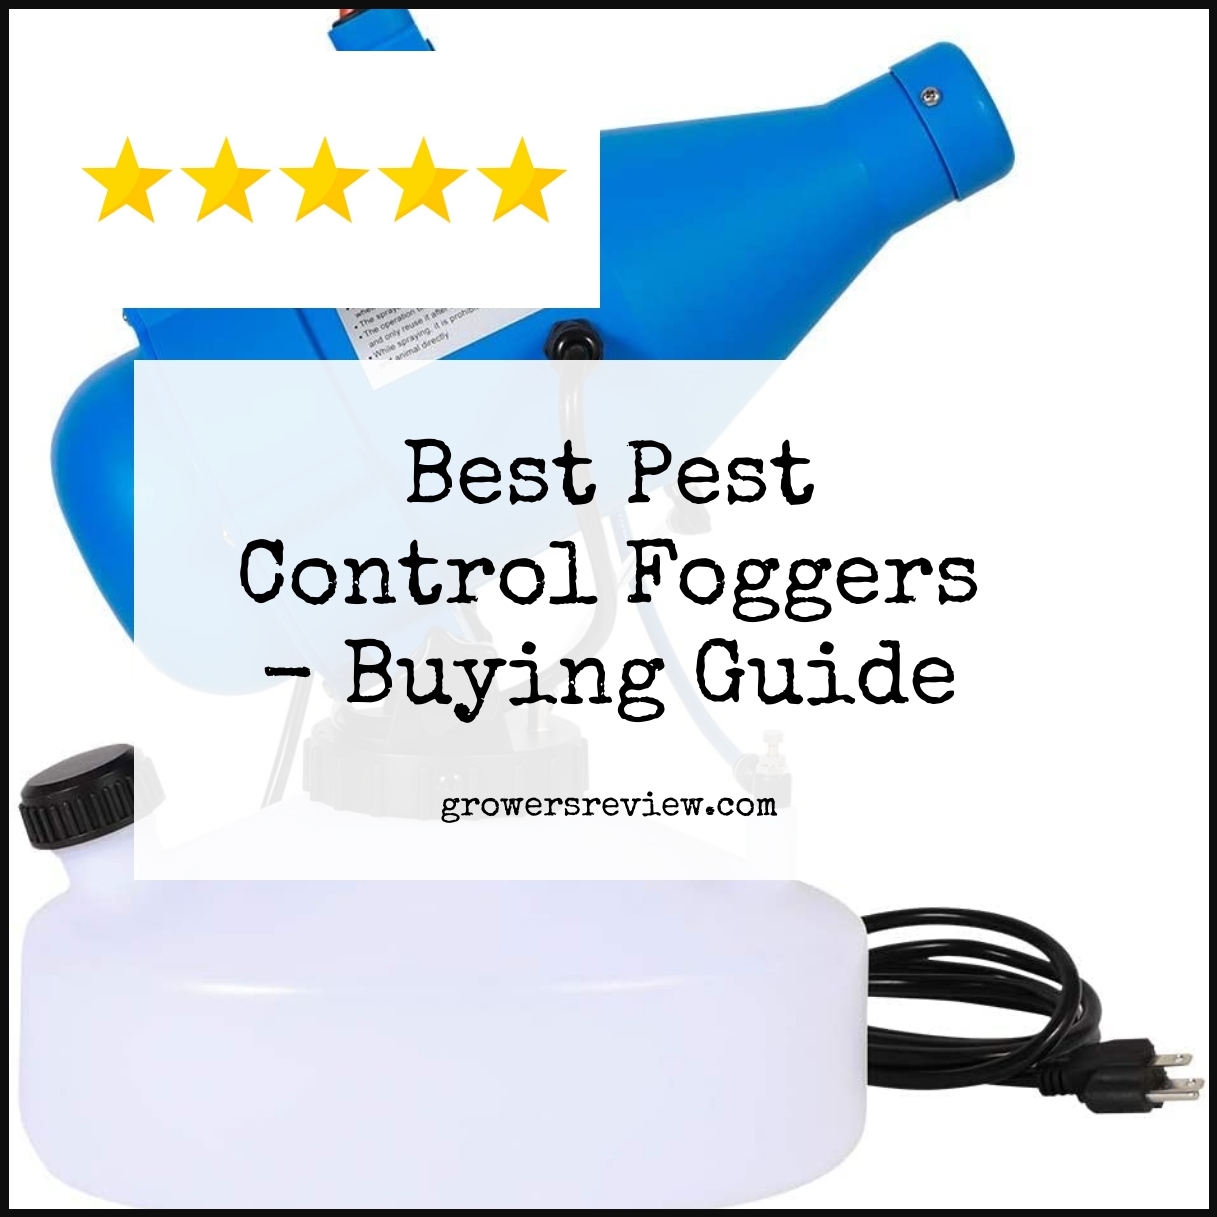 Best Pest Control Foggers - Buying Guide